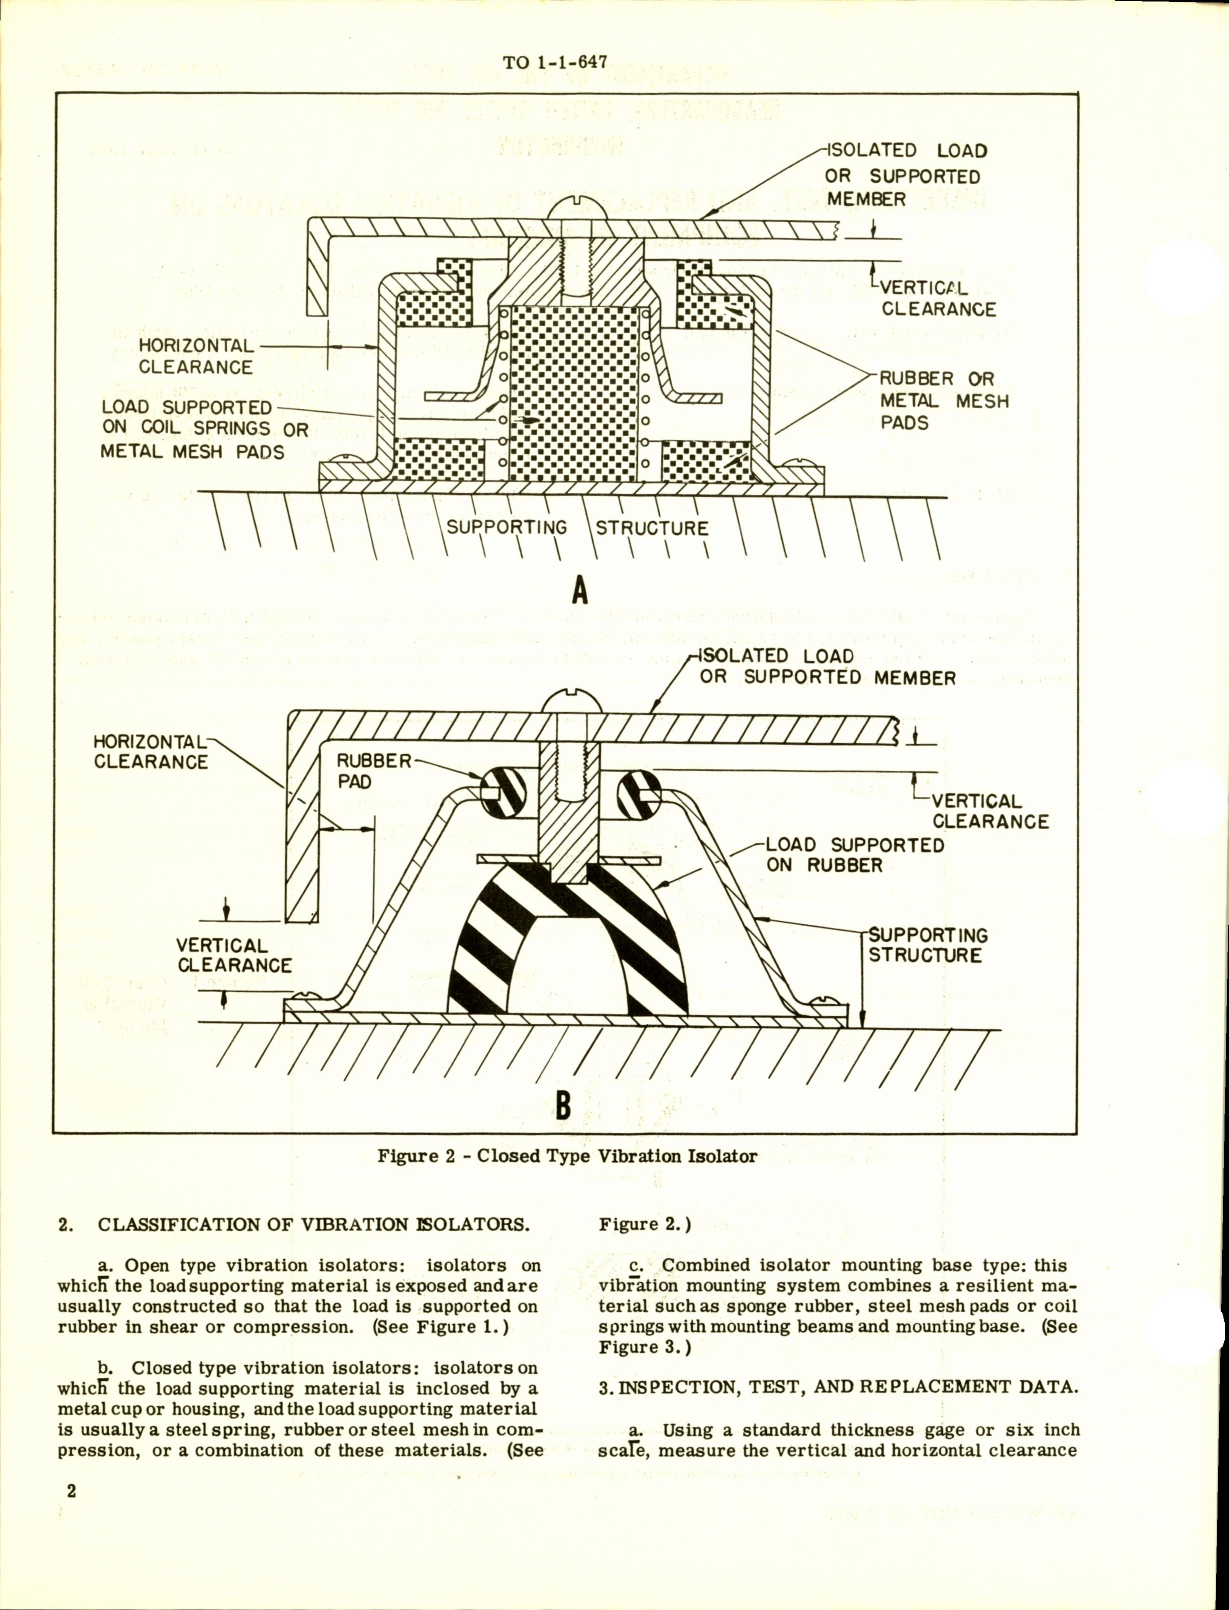 Sample page 2 from AirCorps Library document: Inspection Test and Replacement of Vibration Isolators on Equipment